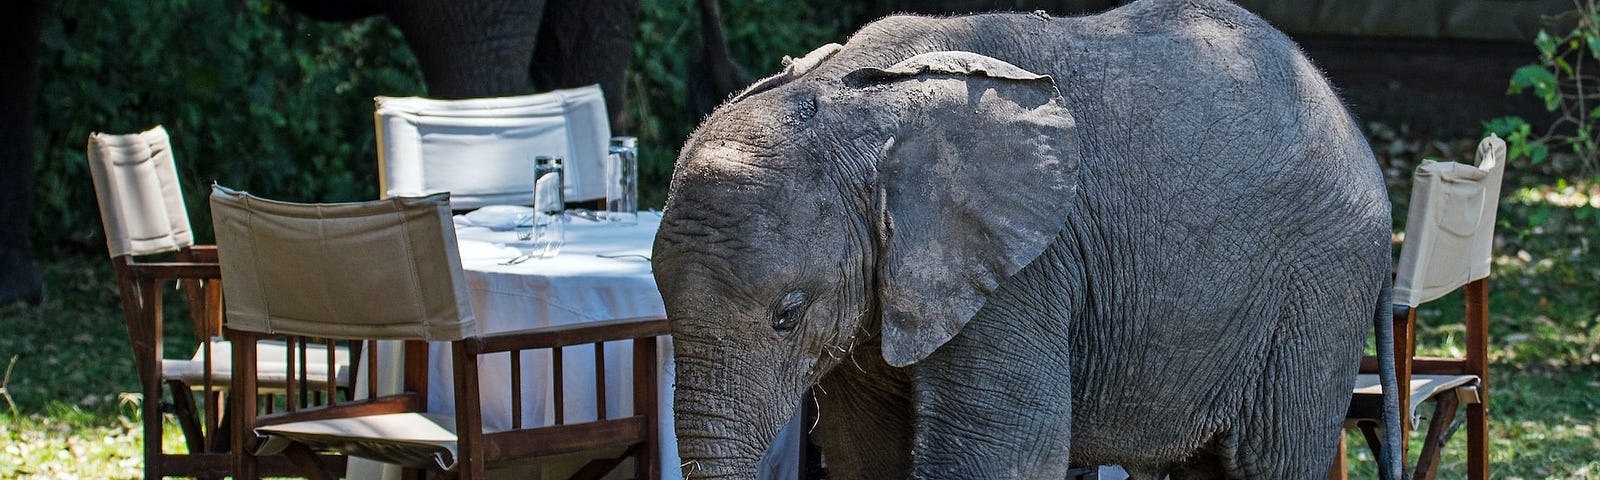 An oblivious baby elephant walks past a table set up for al-fresco dining in what looks like a garden, with a fence in the background